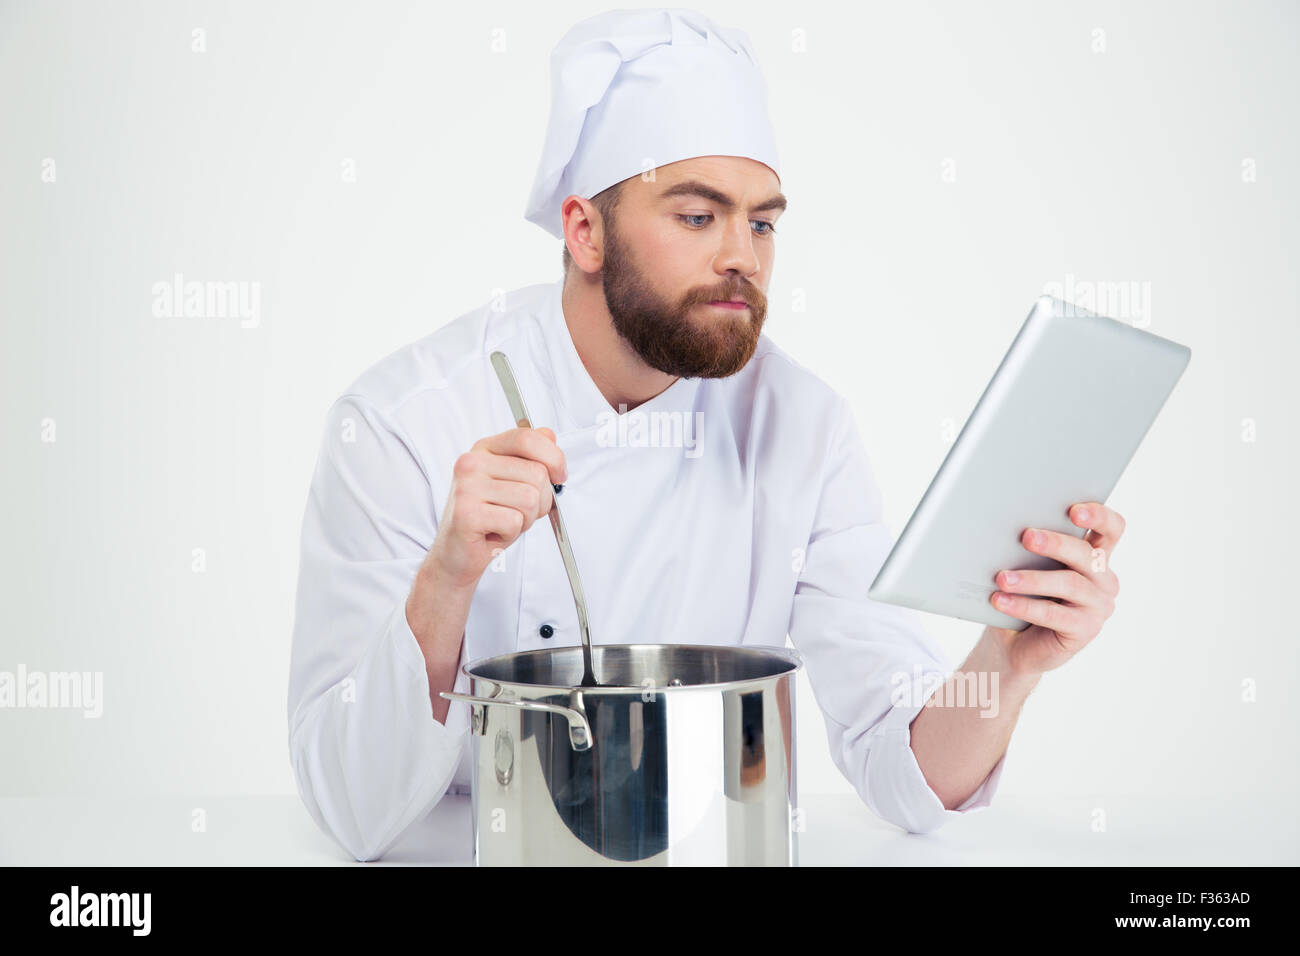 Male chef looking at digital tablet while preparing food isolated on a white background Stock Photo